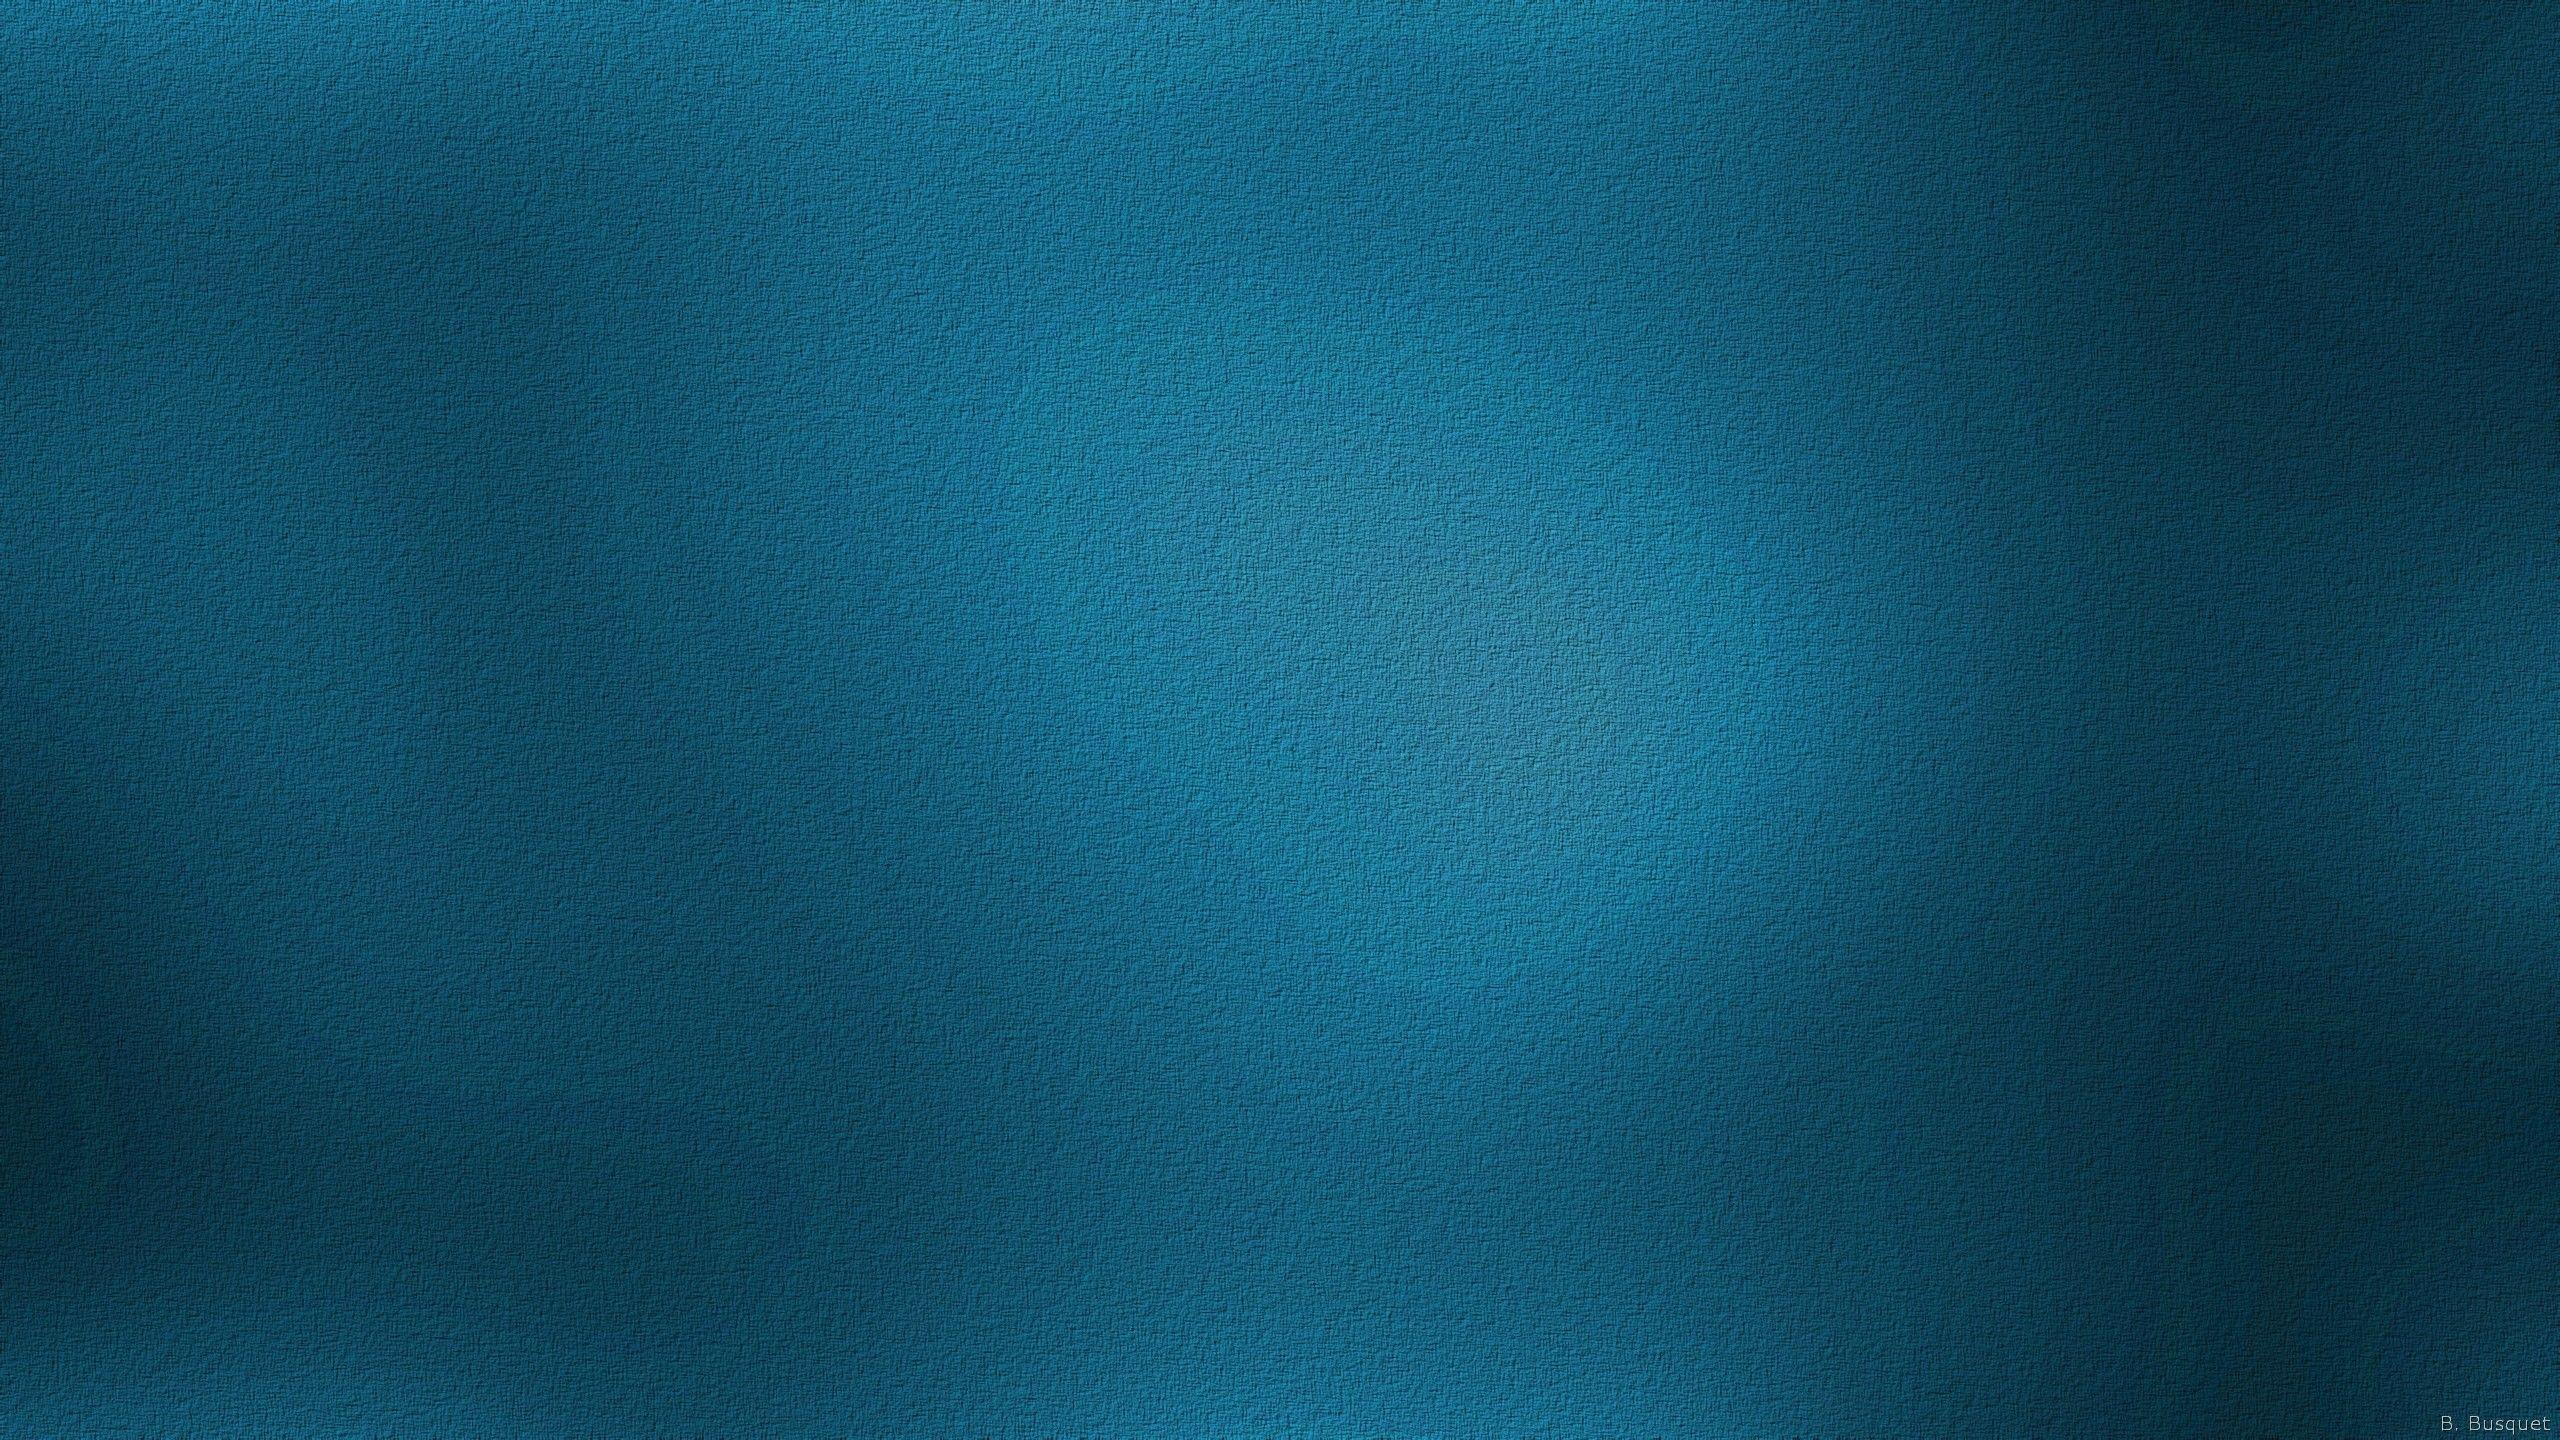 Teal Blue Abstract Wallpaper